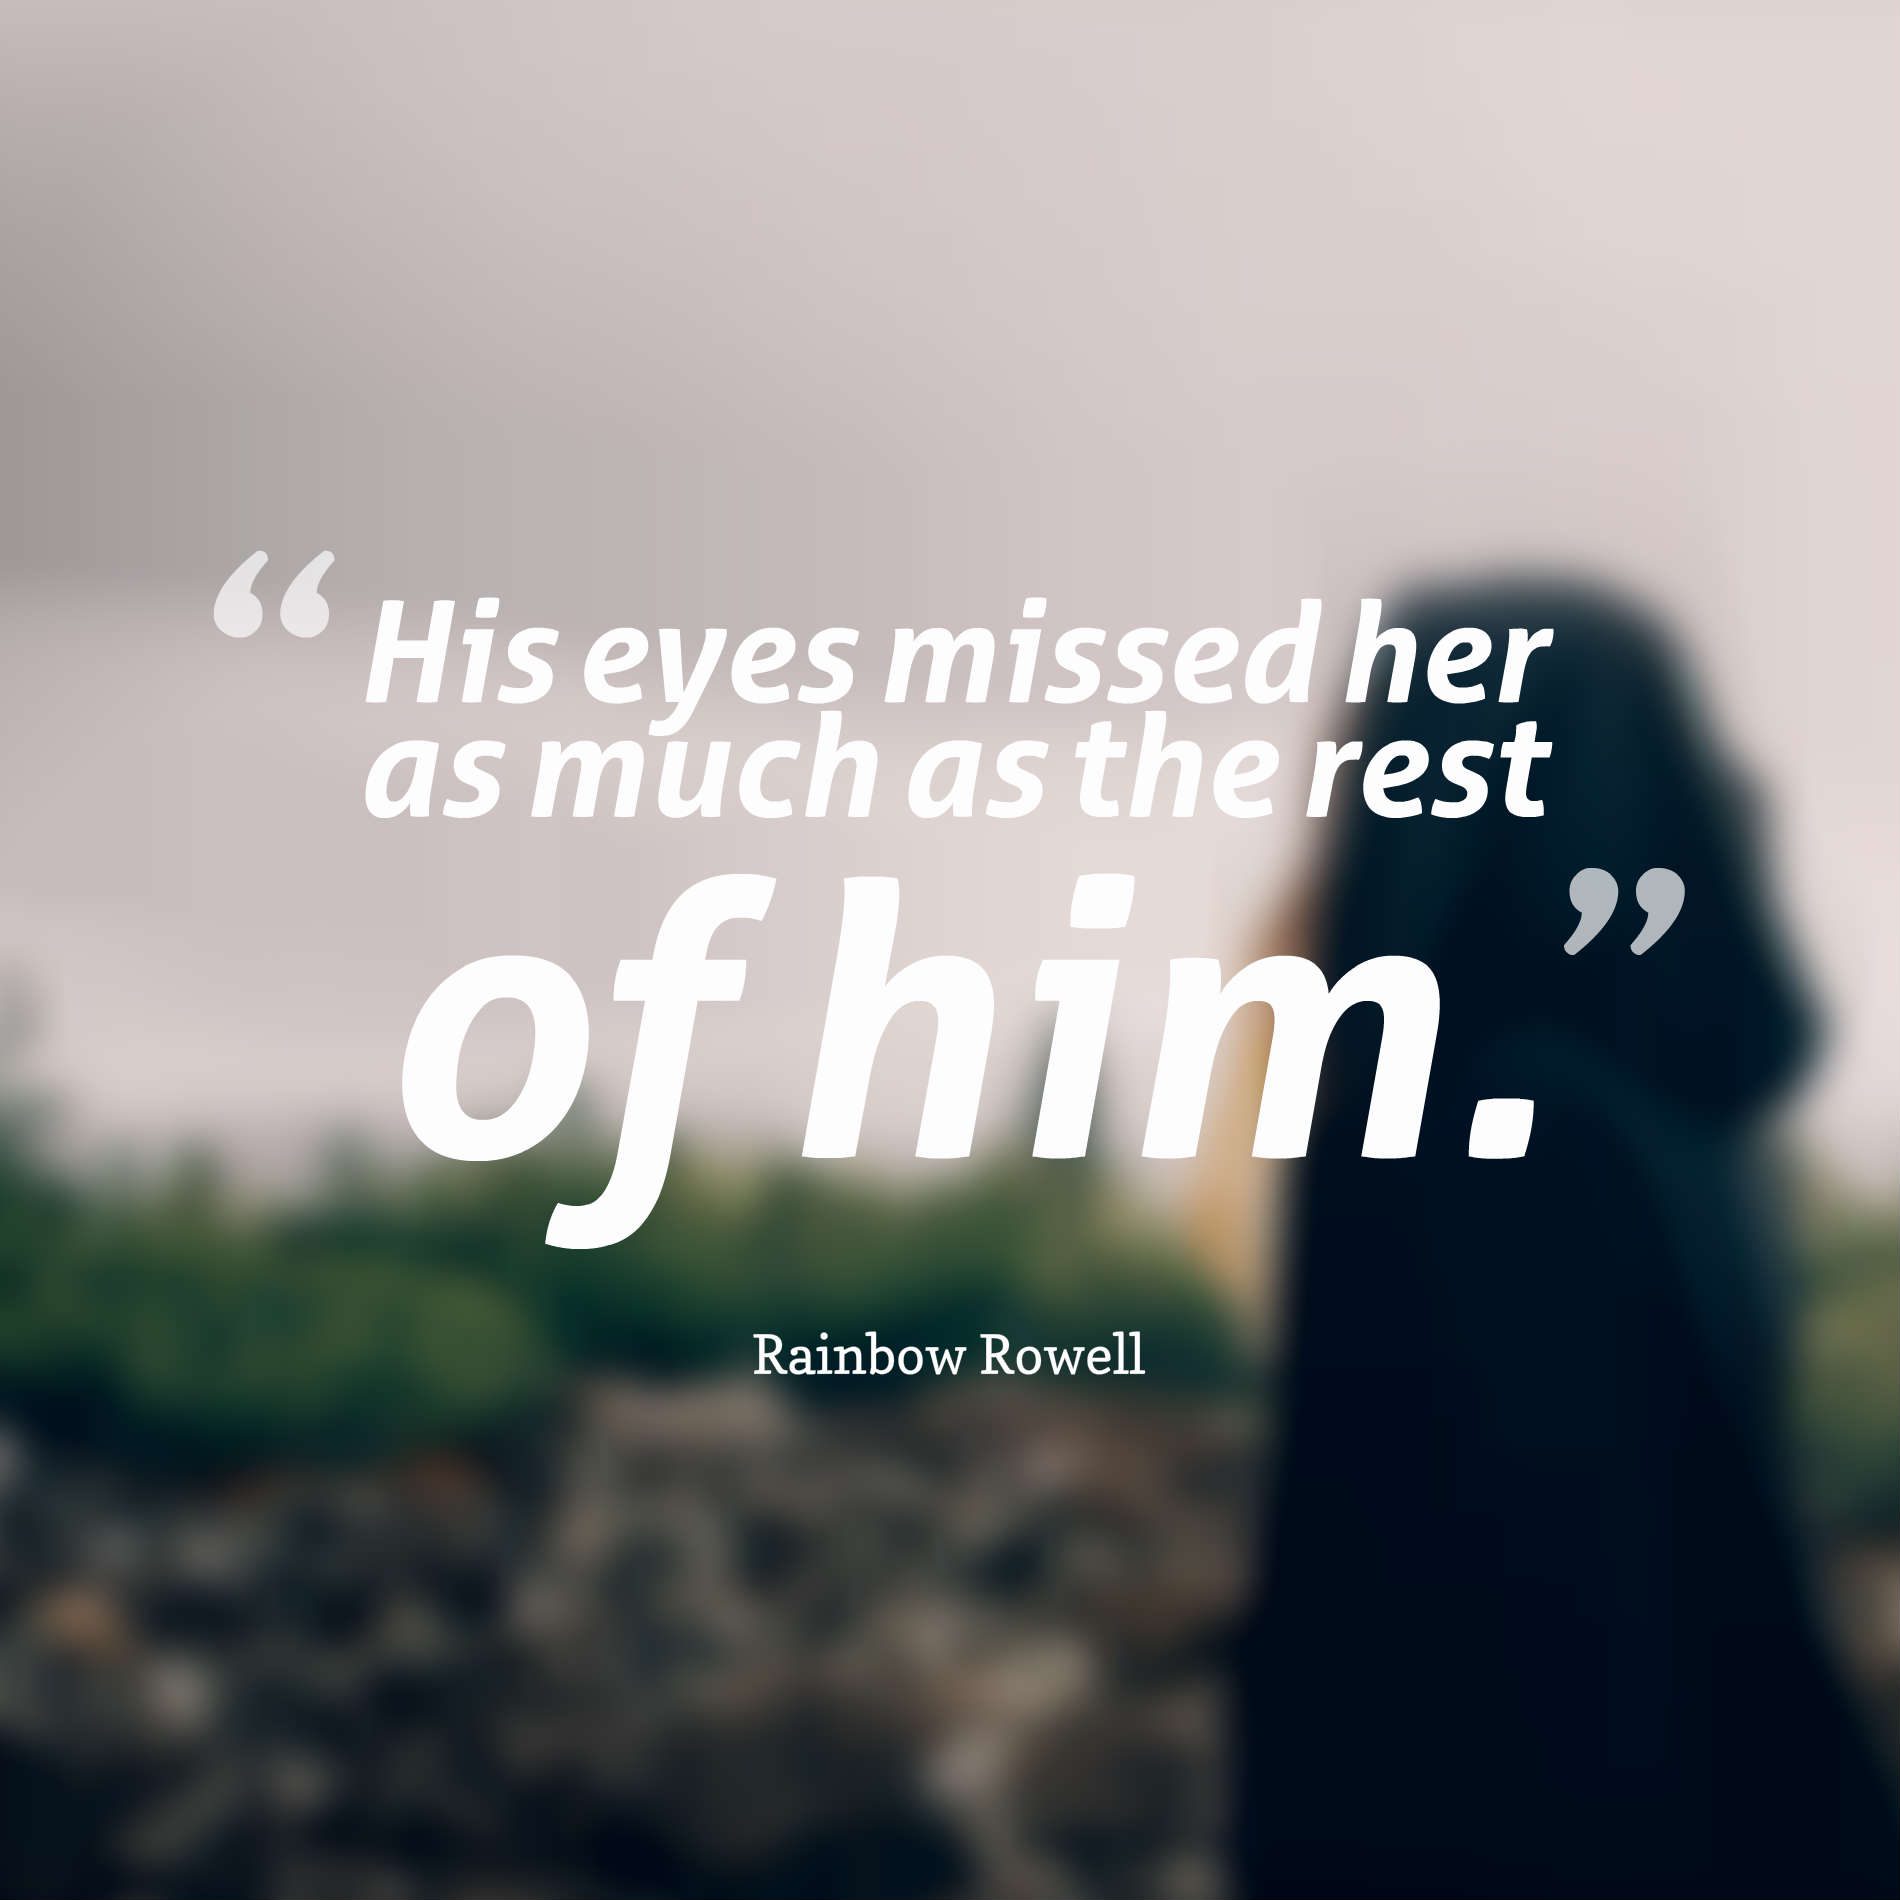 His eyes missed her as much as the rest of him.